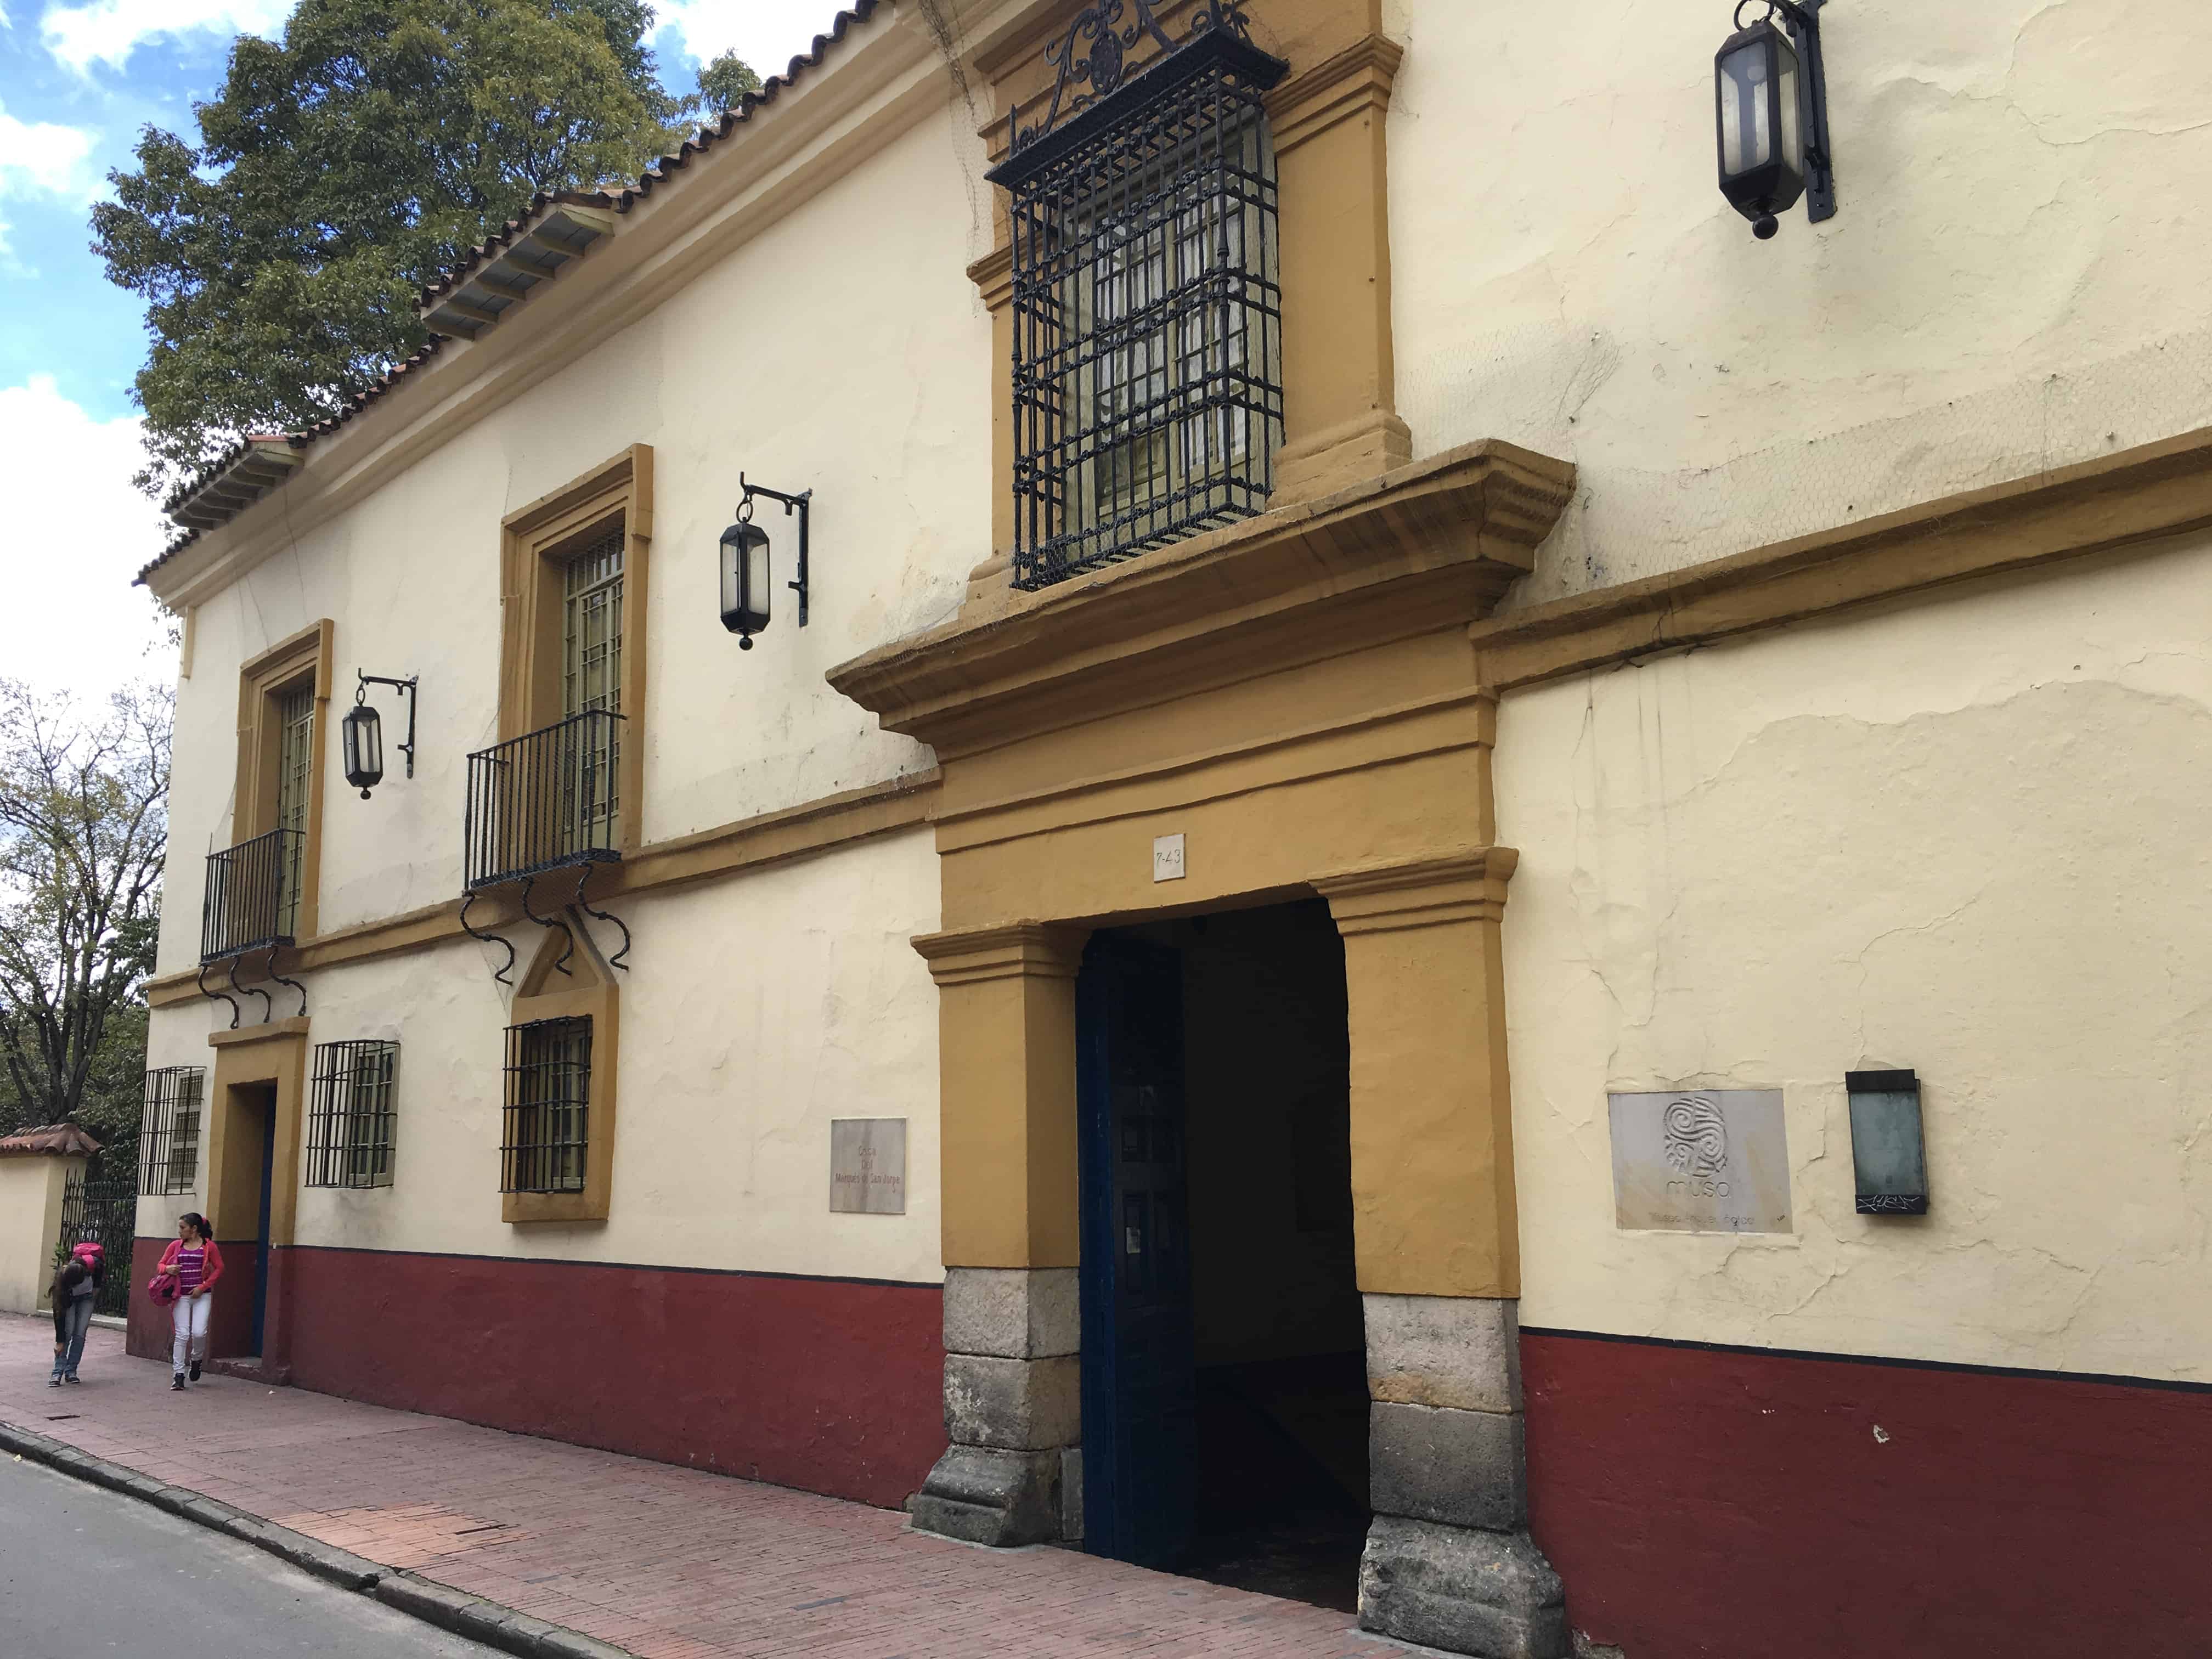 House of the Marquis of San Jorge (Archaeological Museum of Bogotá) in La Candelaria, Bogotá, Colombia